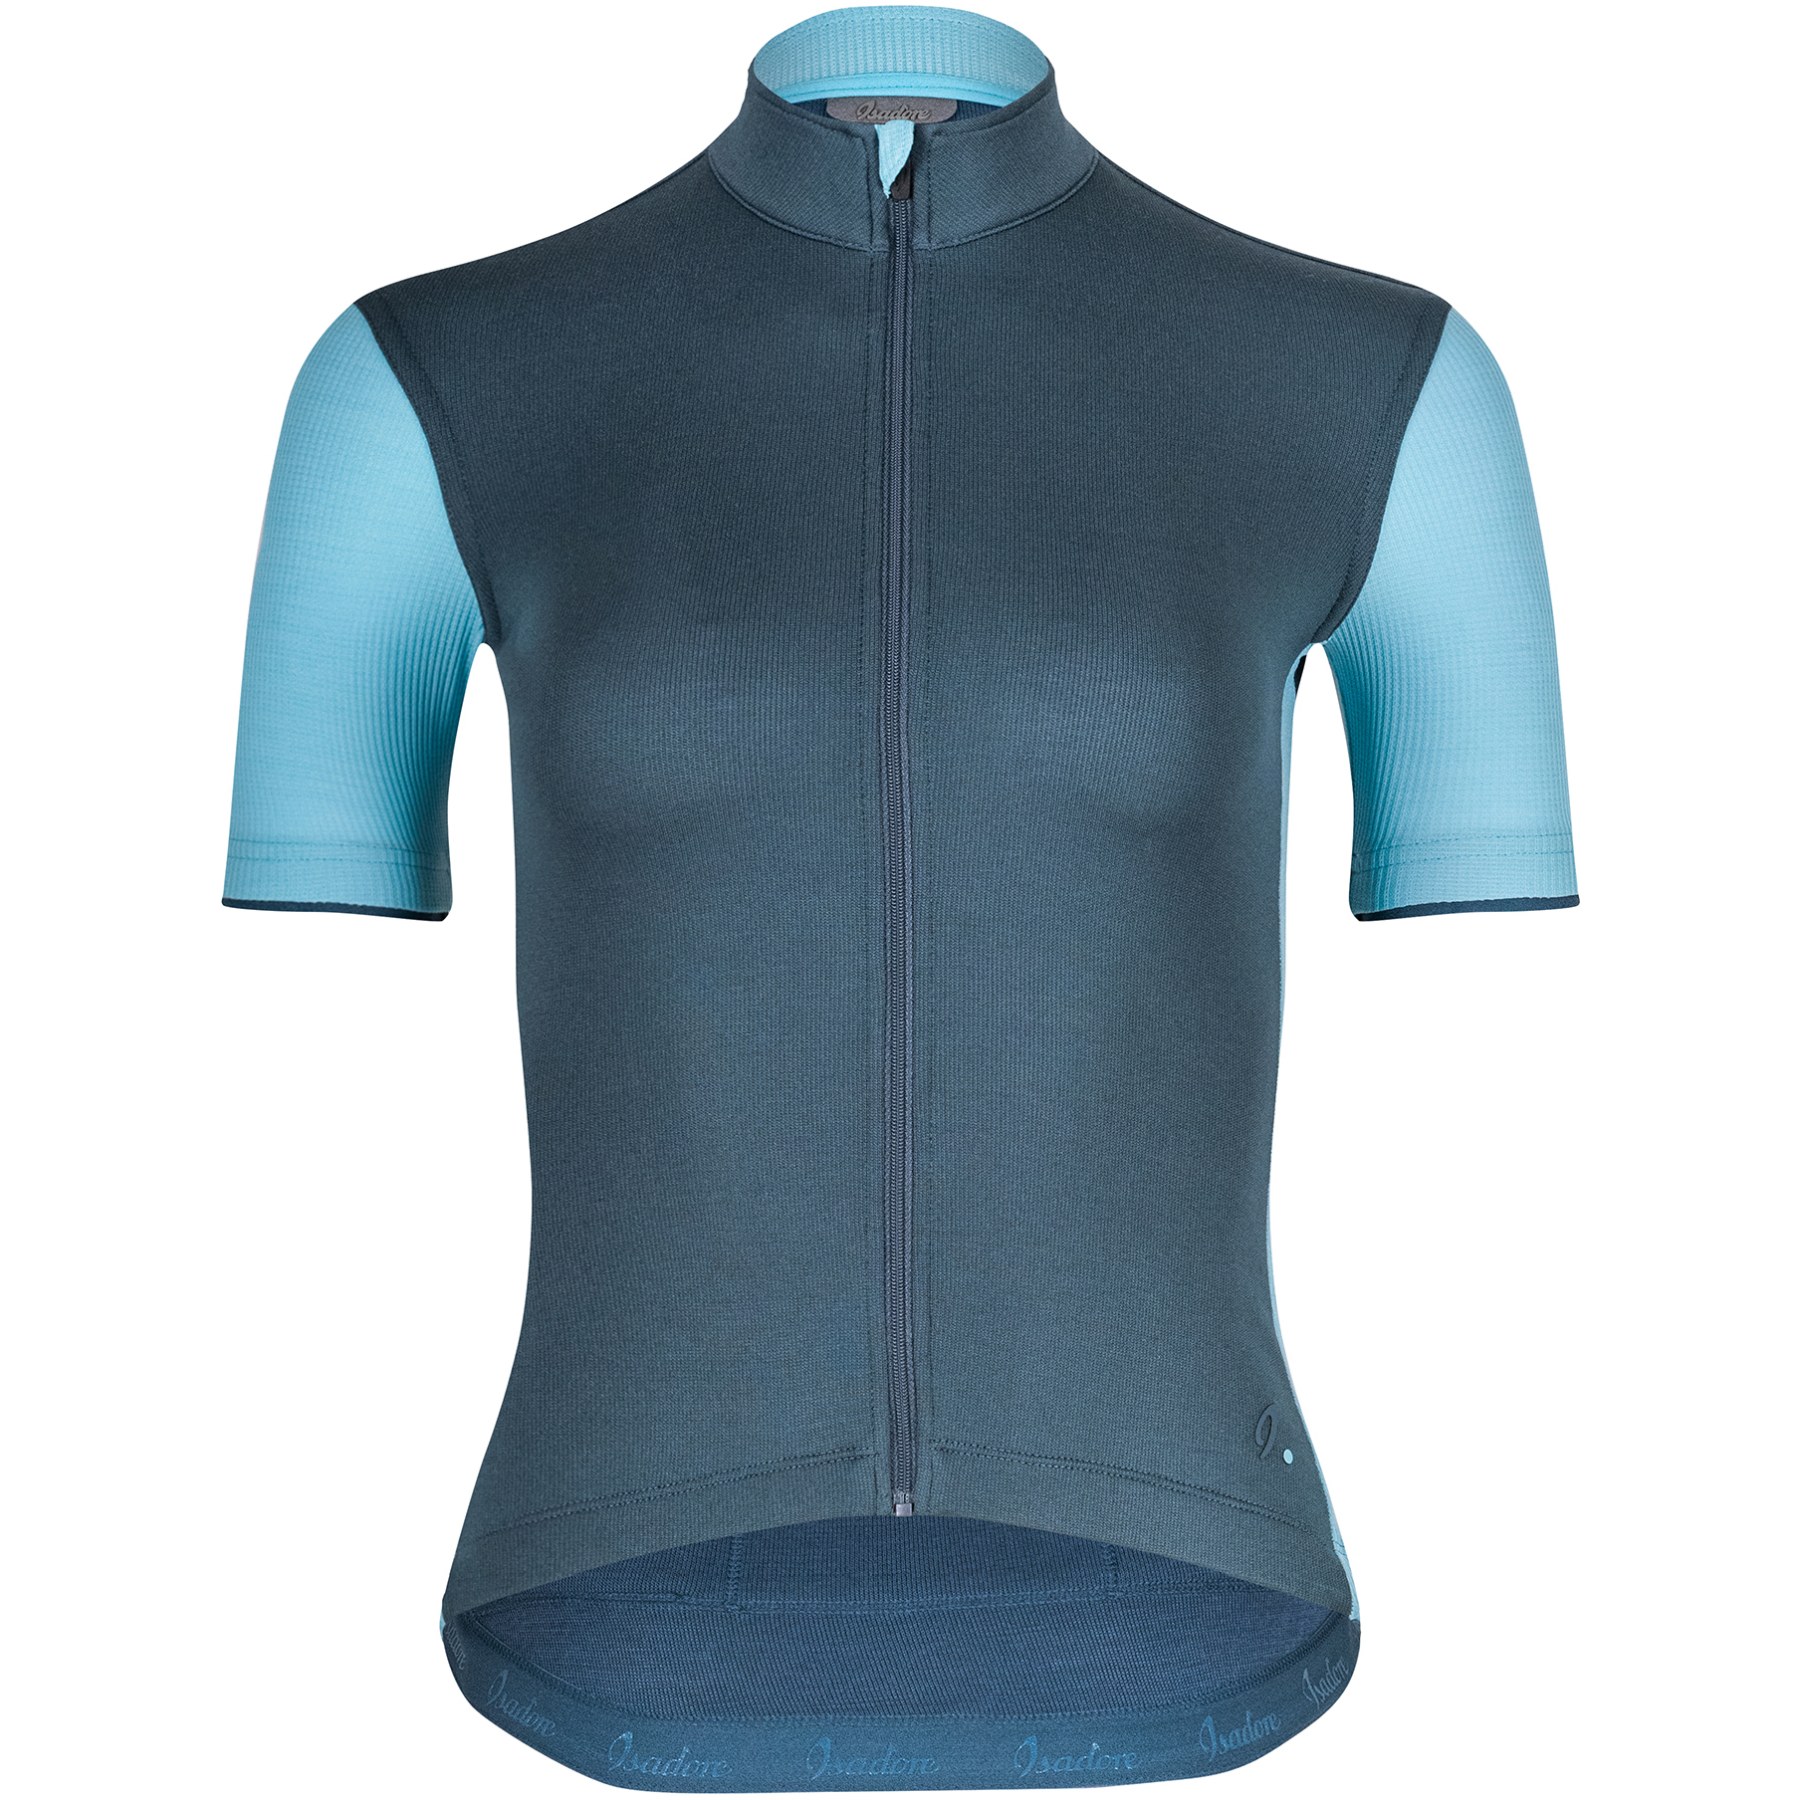 Image of Isadore Signature Women's Cycling Jersey - Orion Blue/Aquarelle